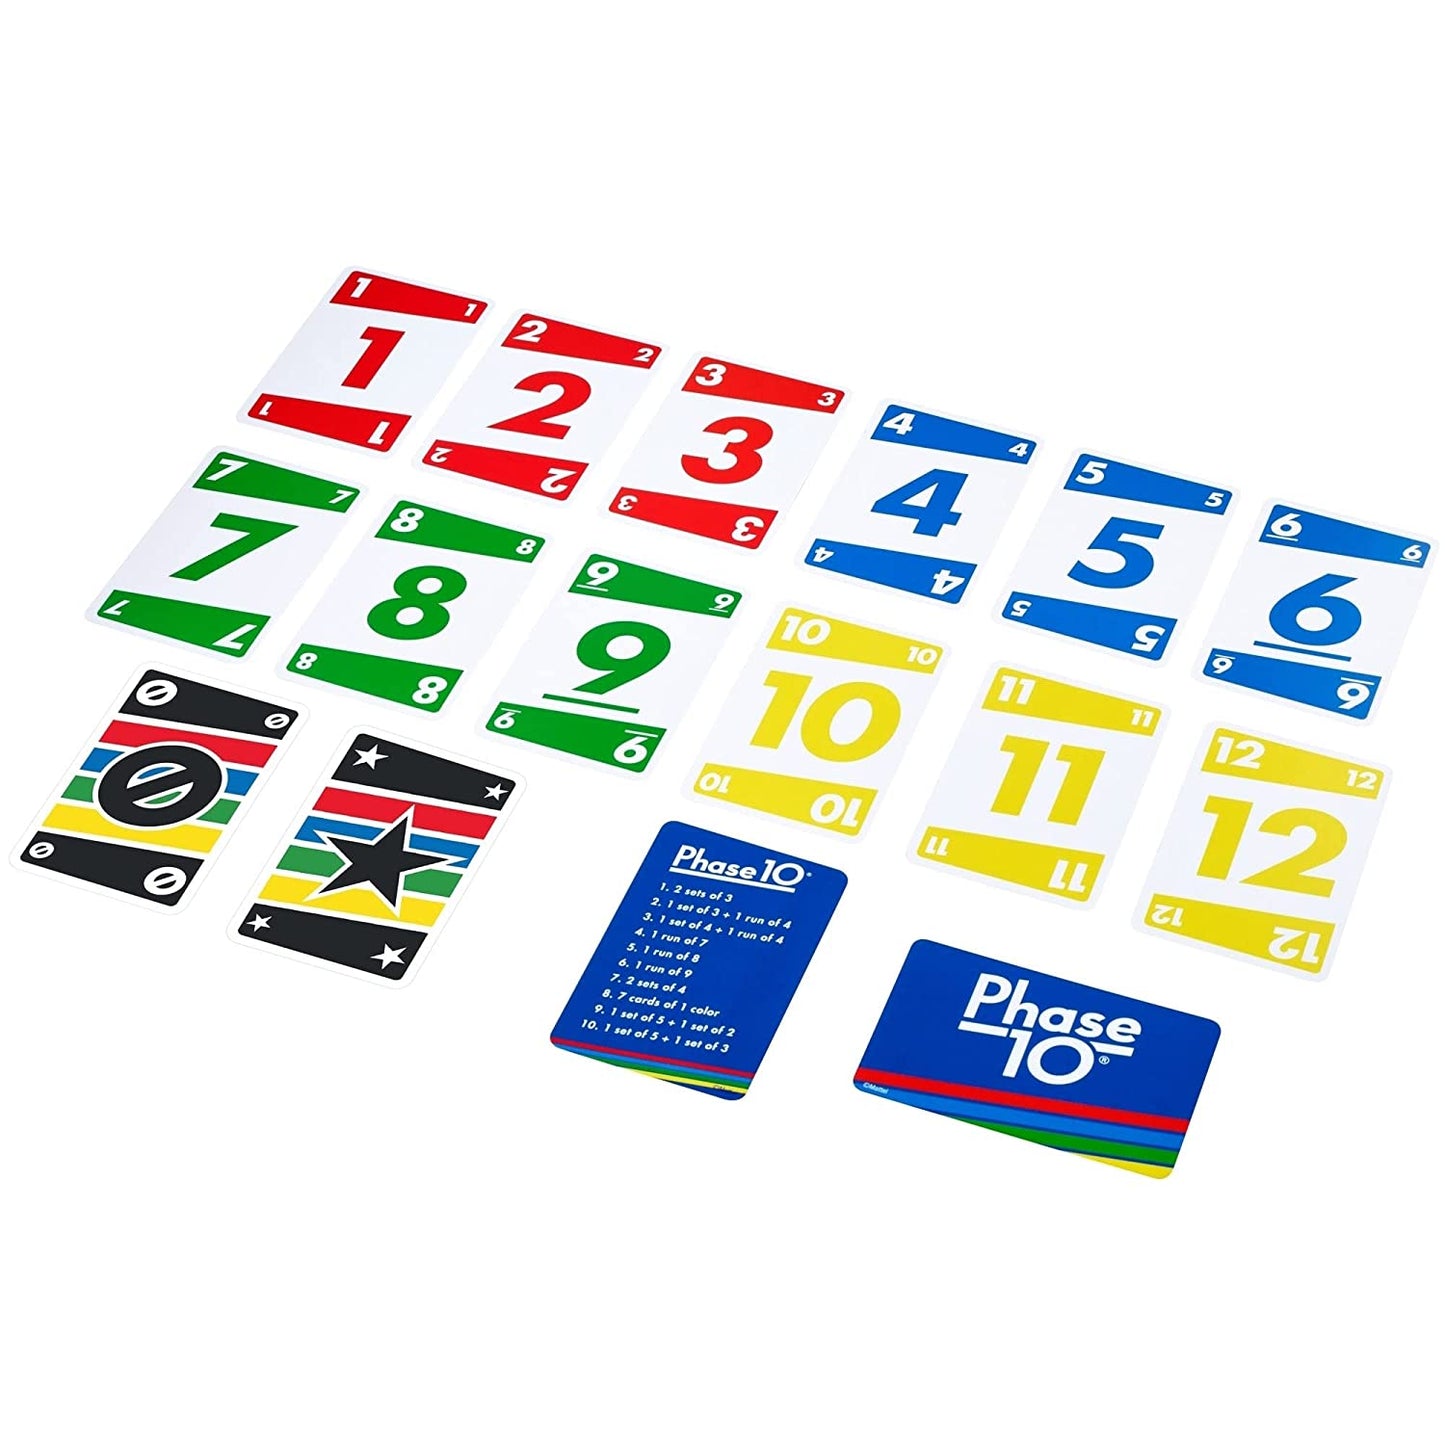 Phase 10 Card Game for Kid | | Age :  3 Years + by Mattel